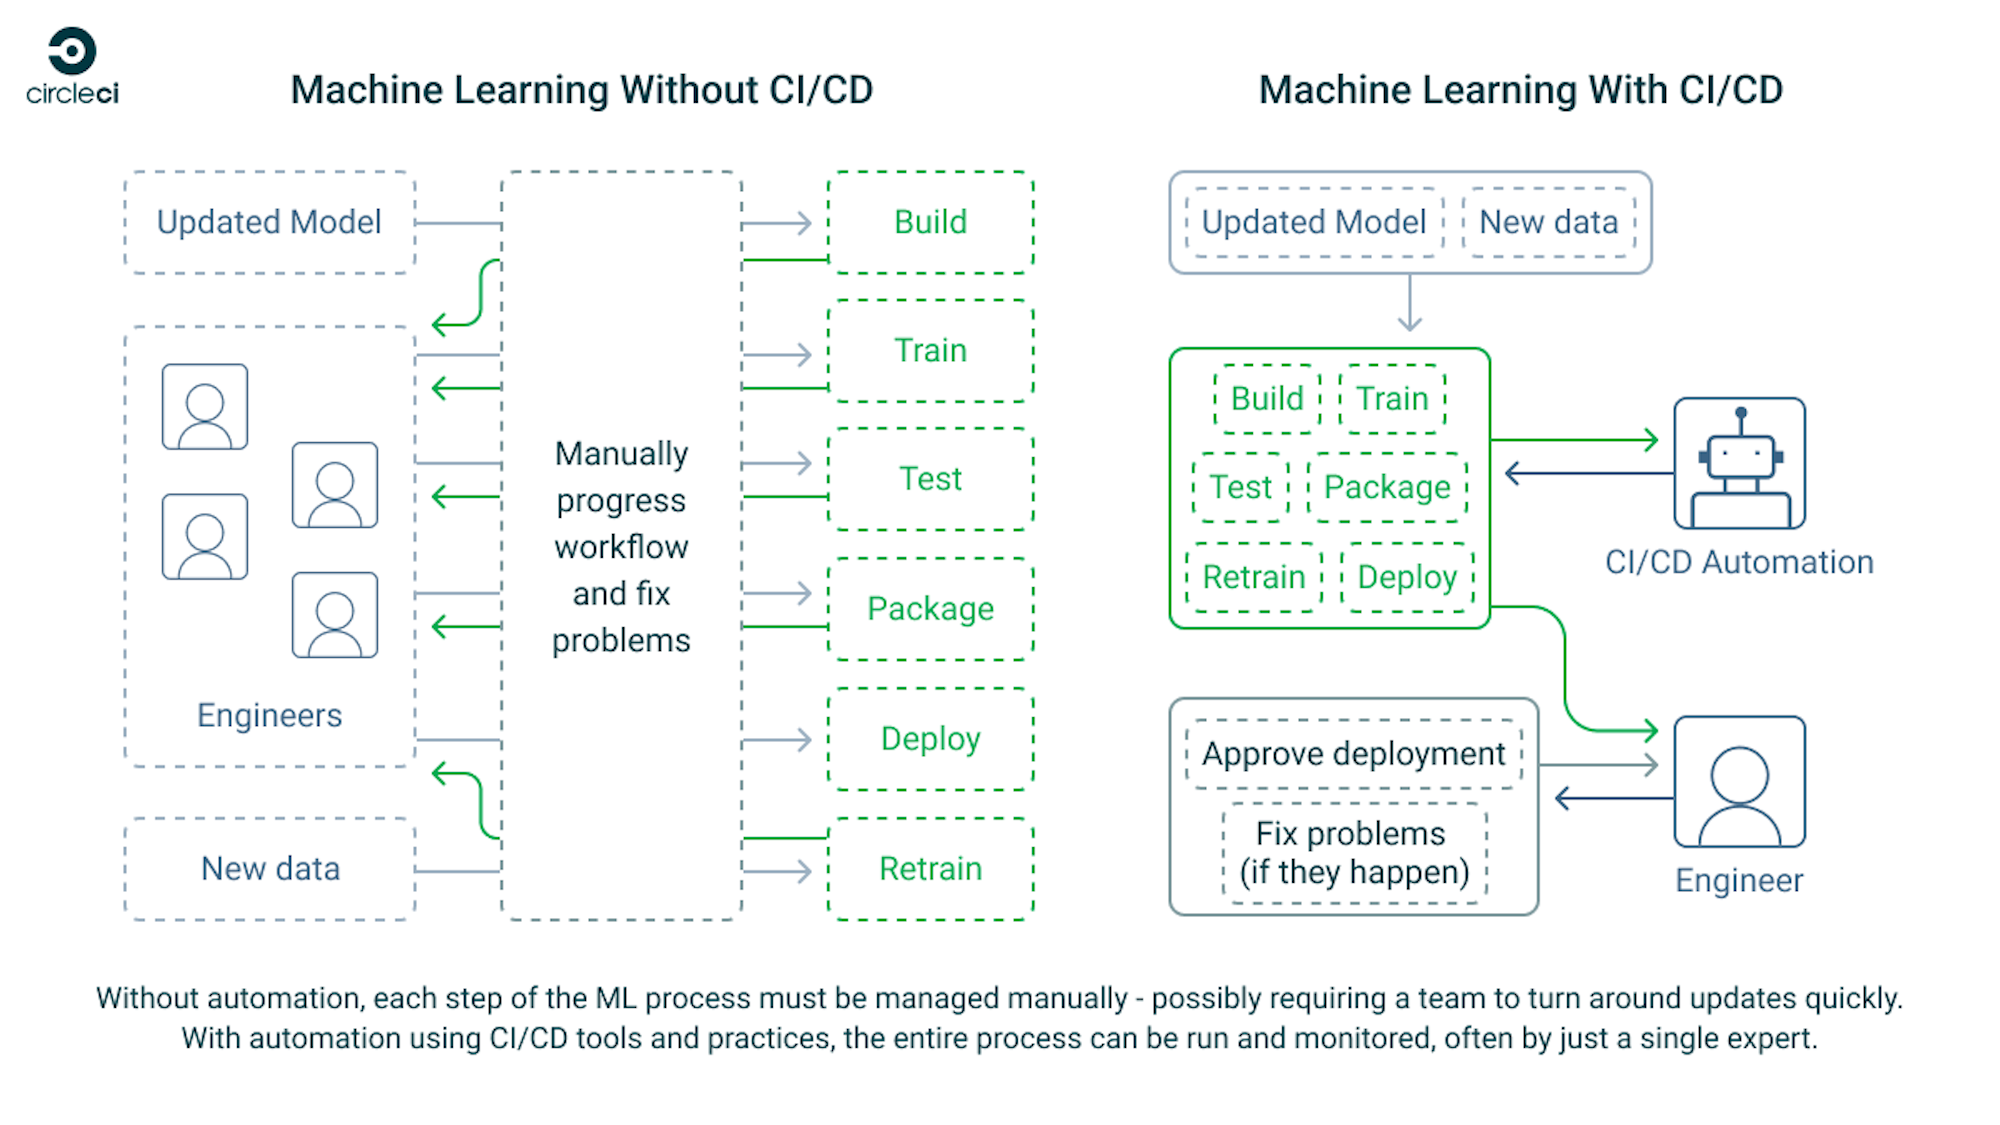 A diagram showing how ML workflows are greatly accelerated by integrating CI/CD tools and best practices